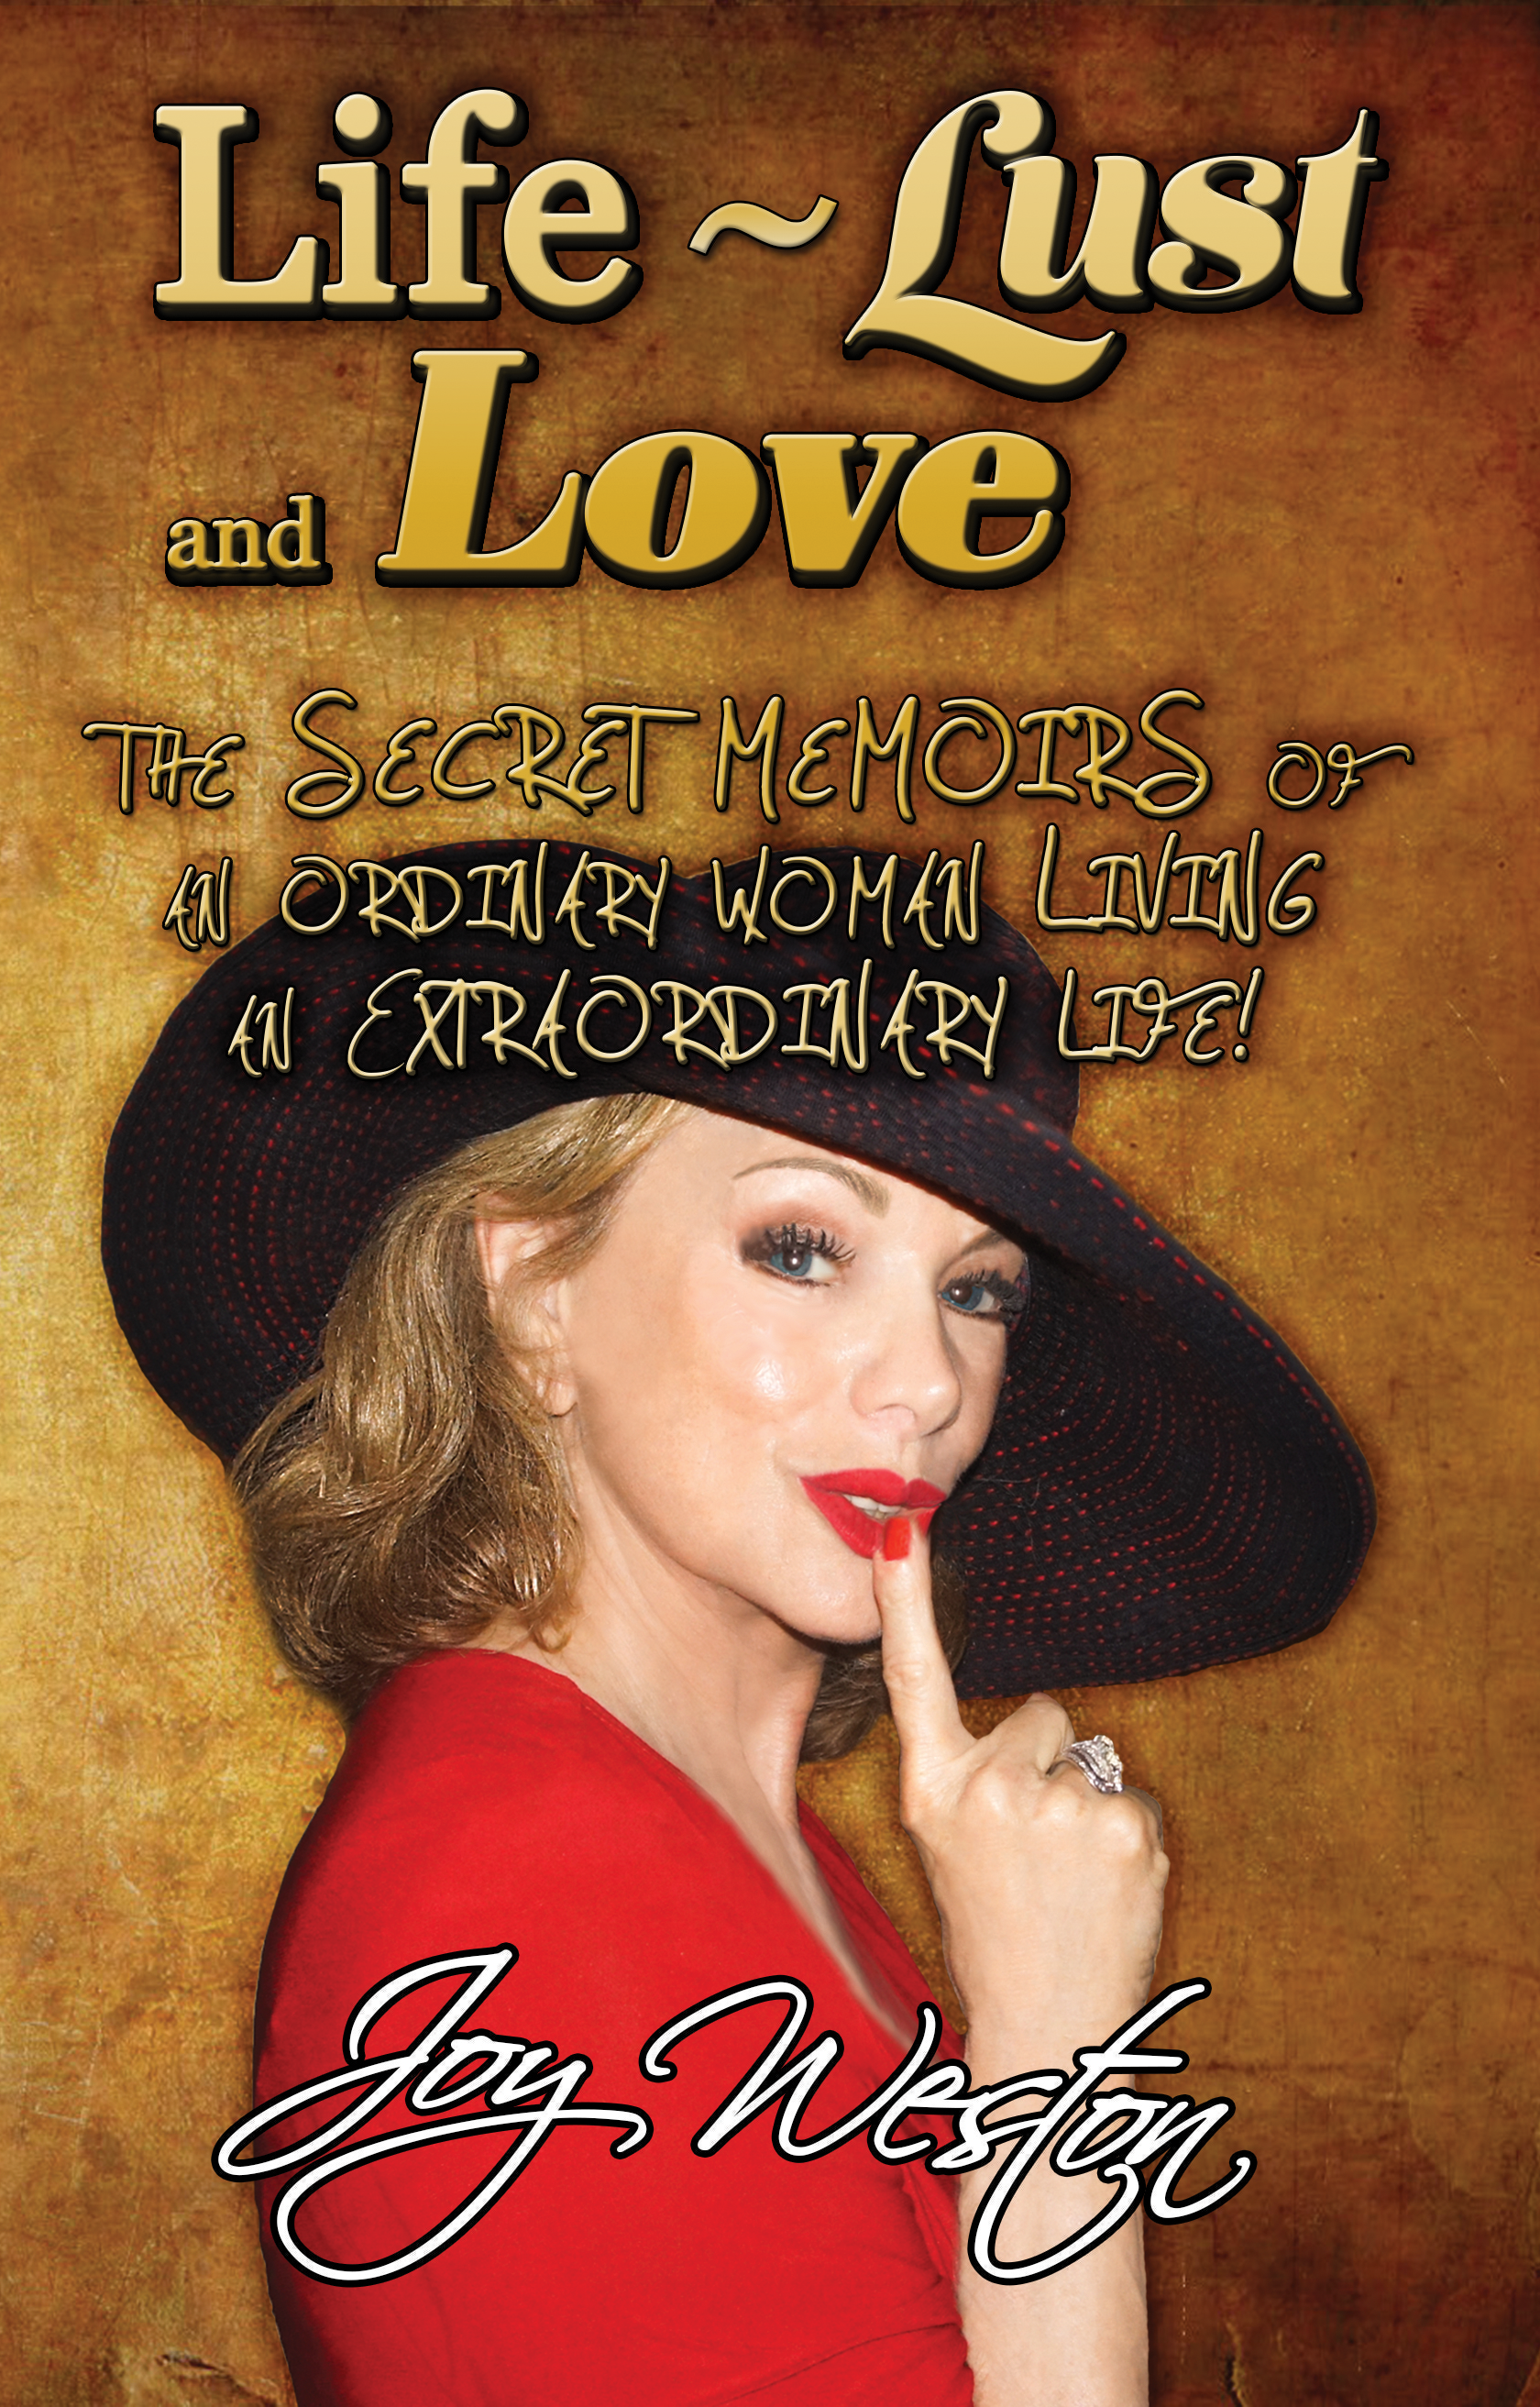 life_lust_and_love_frontcover